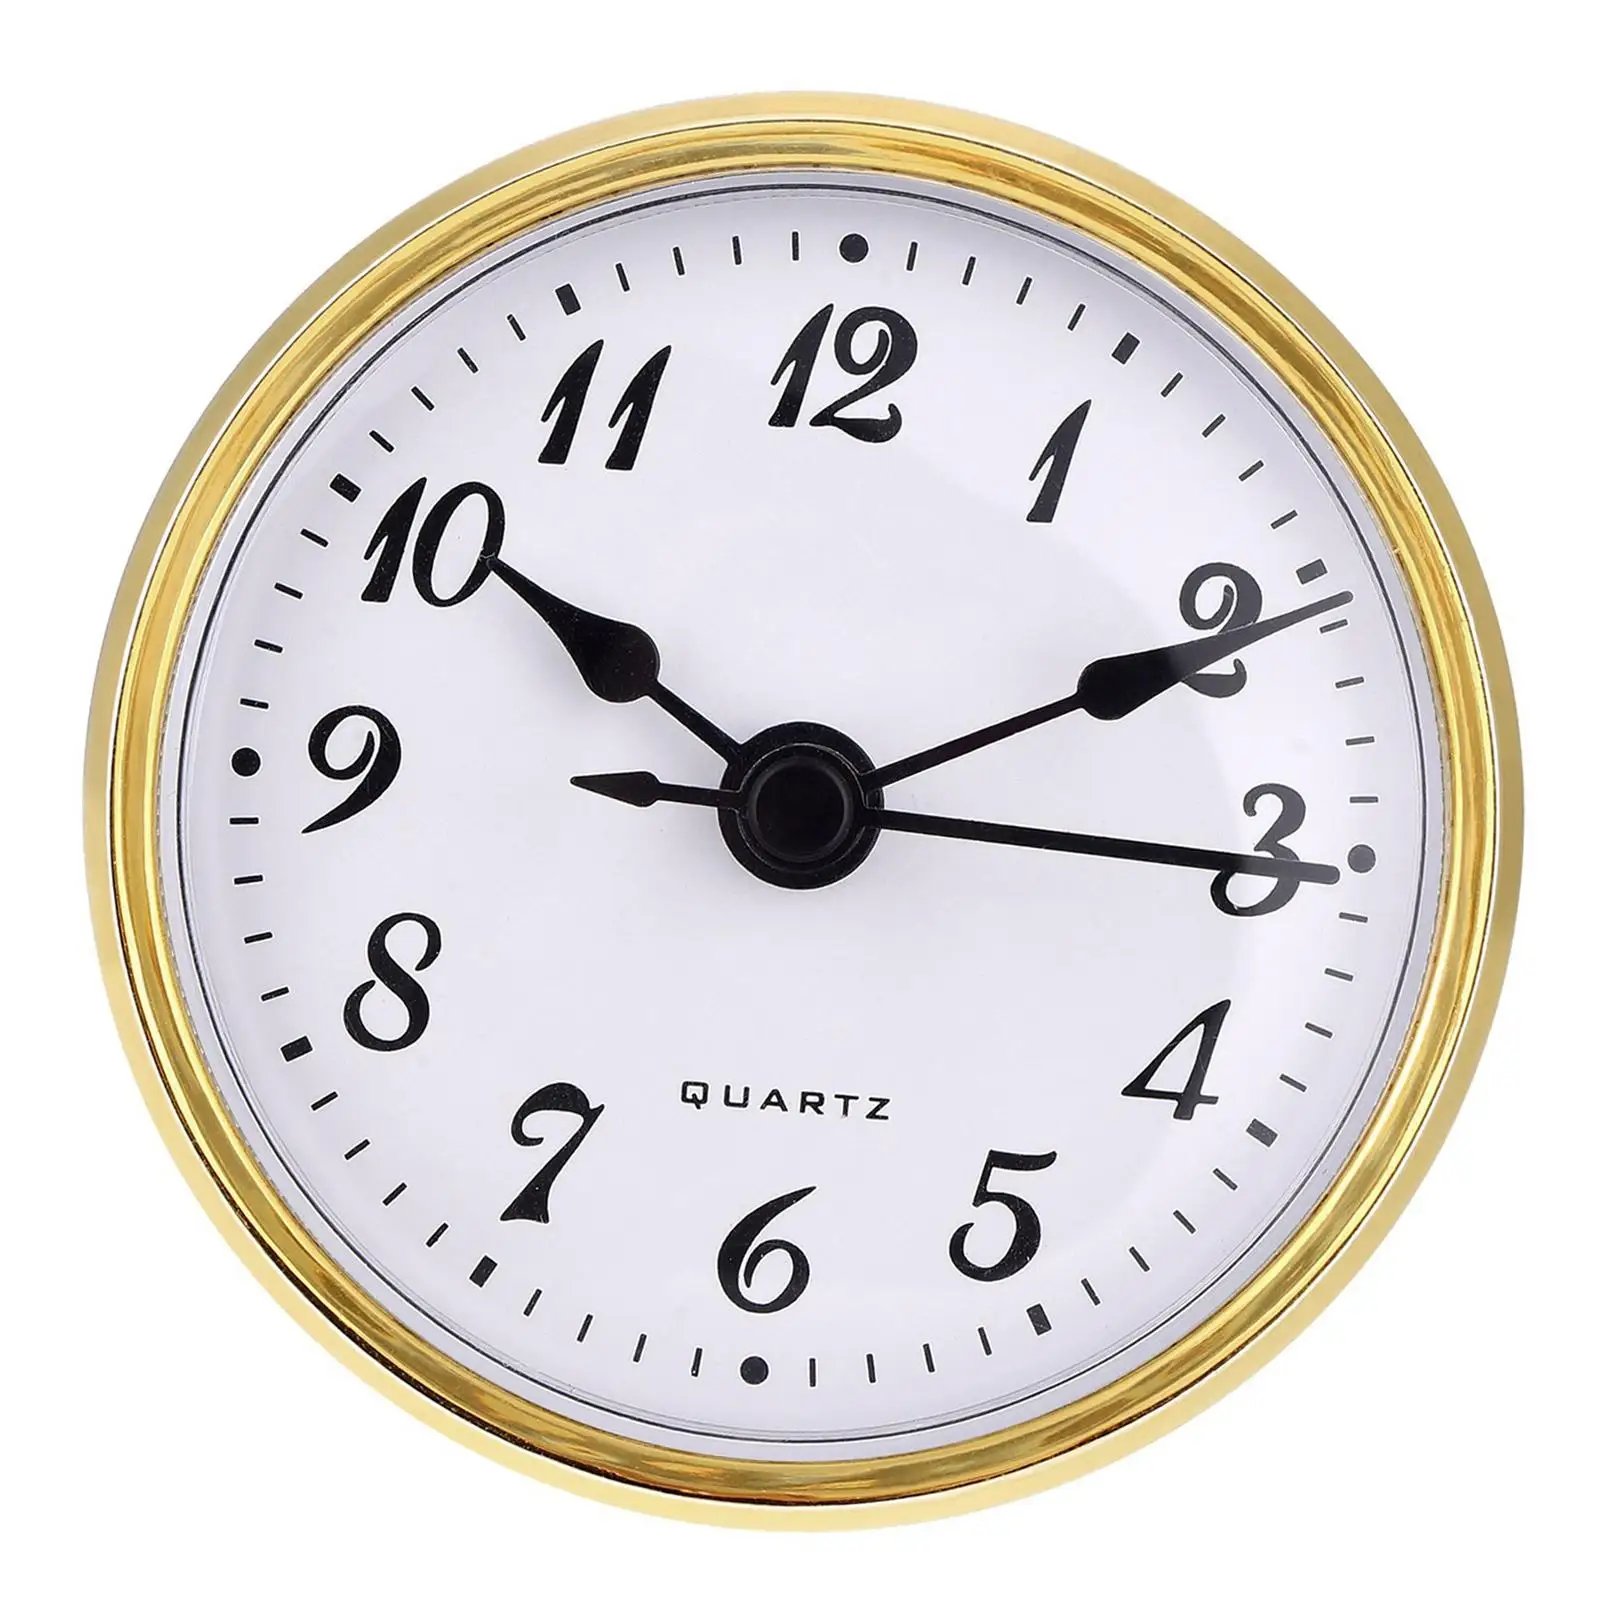 Clock Insert Arabic Numeral Craft Gold Rim Retro Style Clock Mechanism 70mm for Home Living Room Desk Accessories